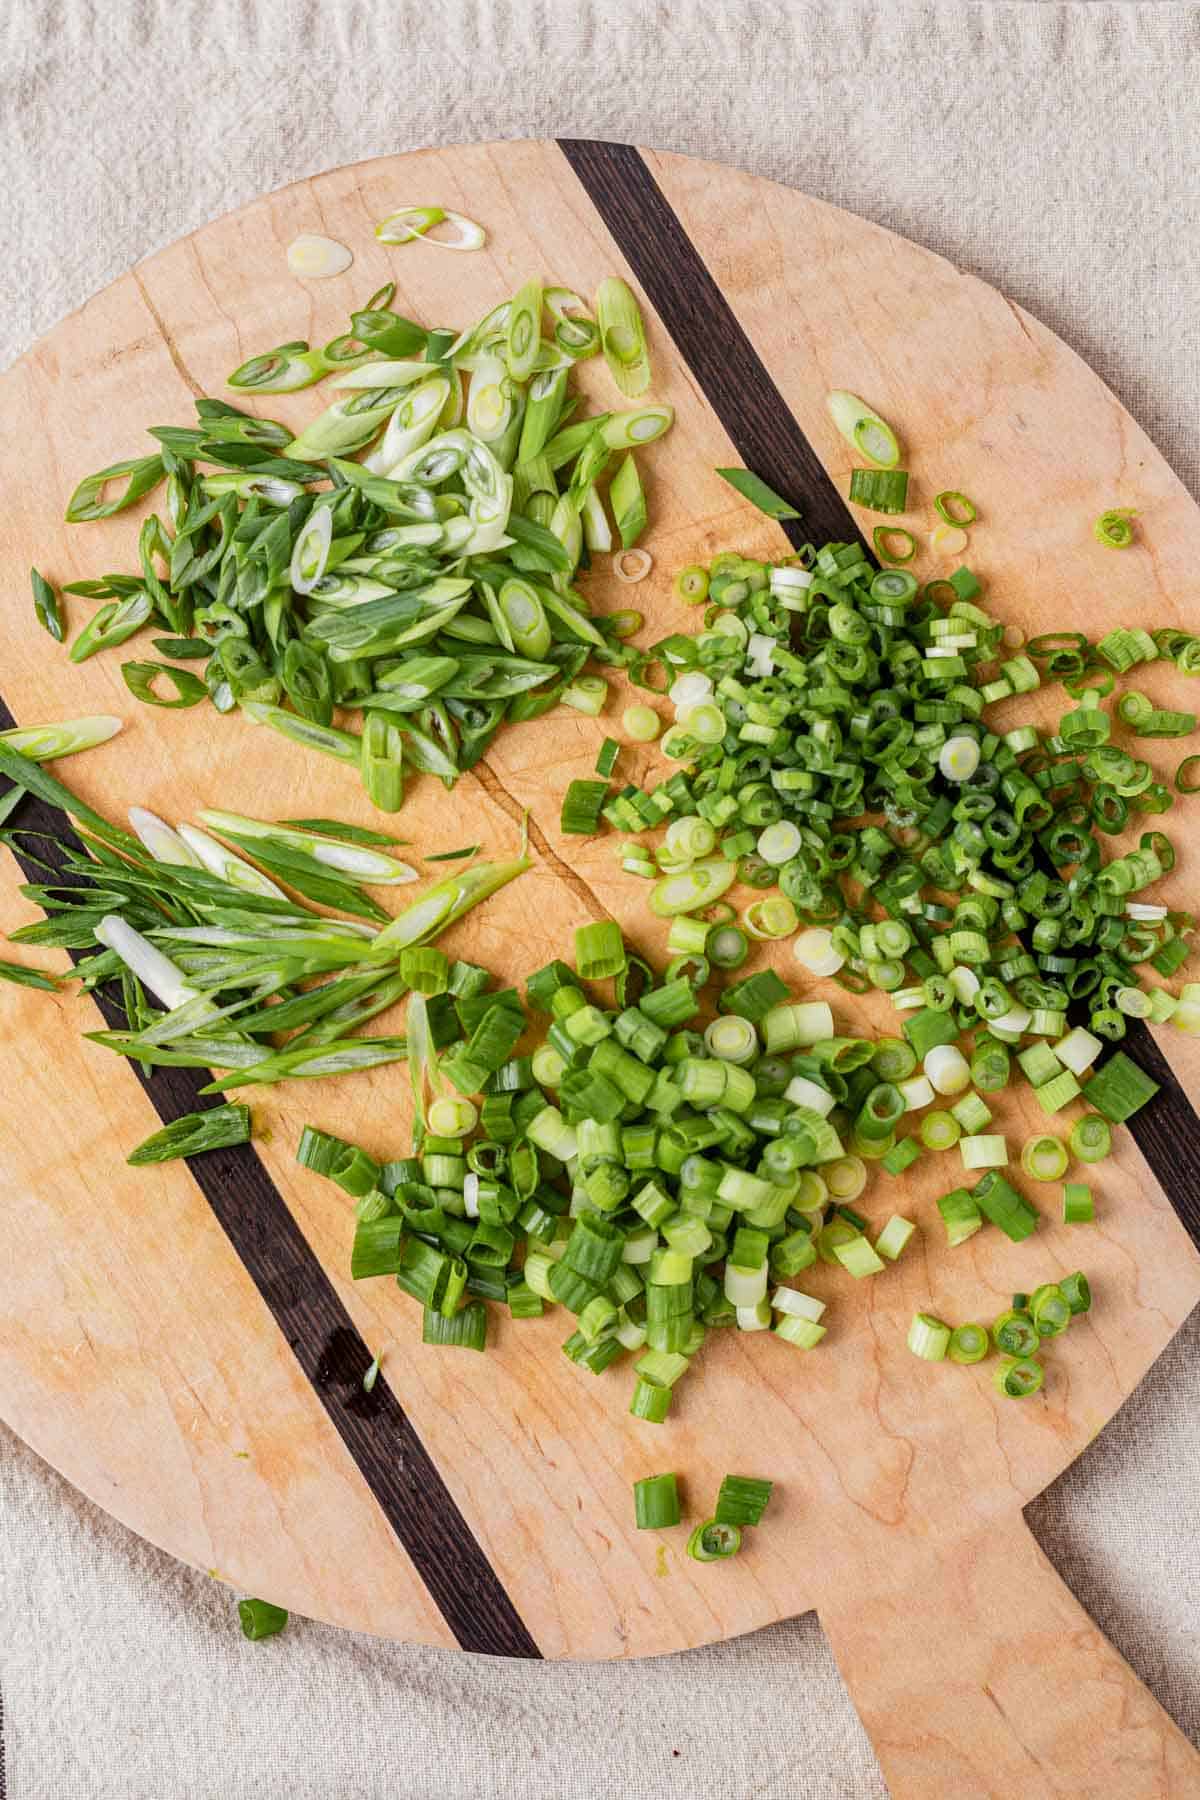 green onions on a cutting board cut up 3 different ways